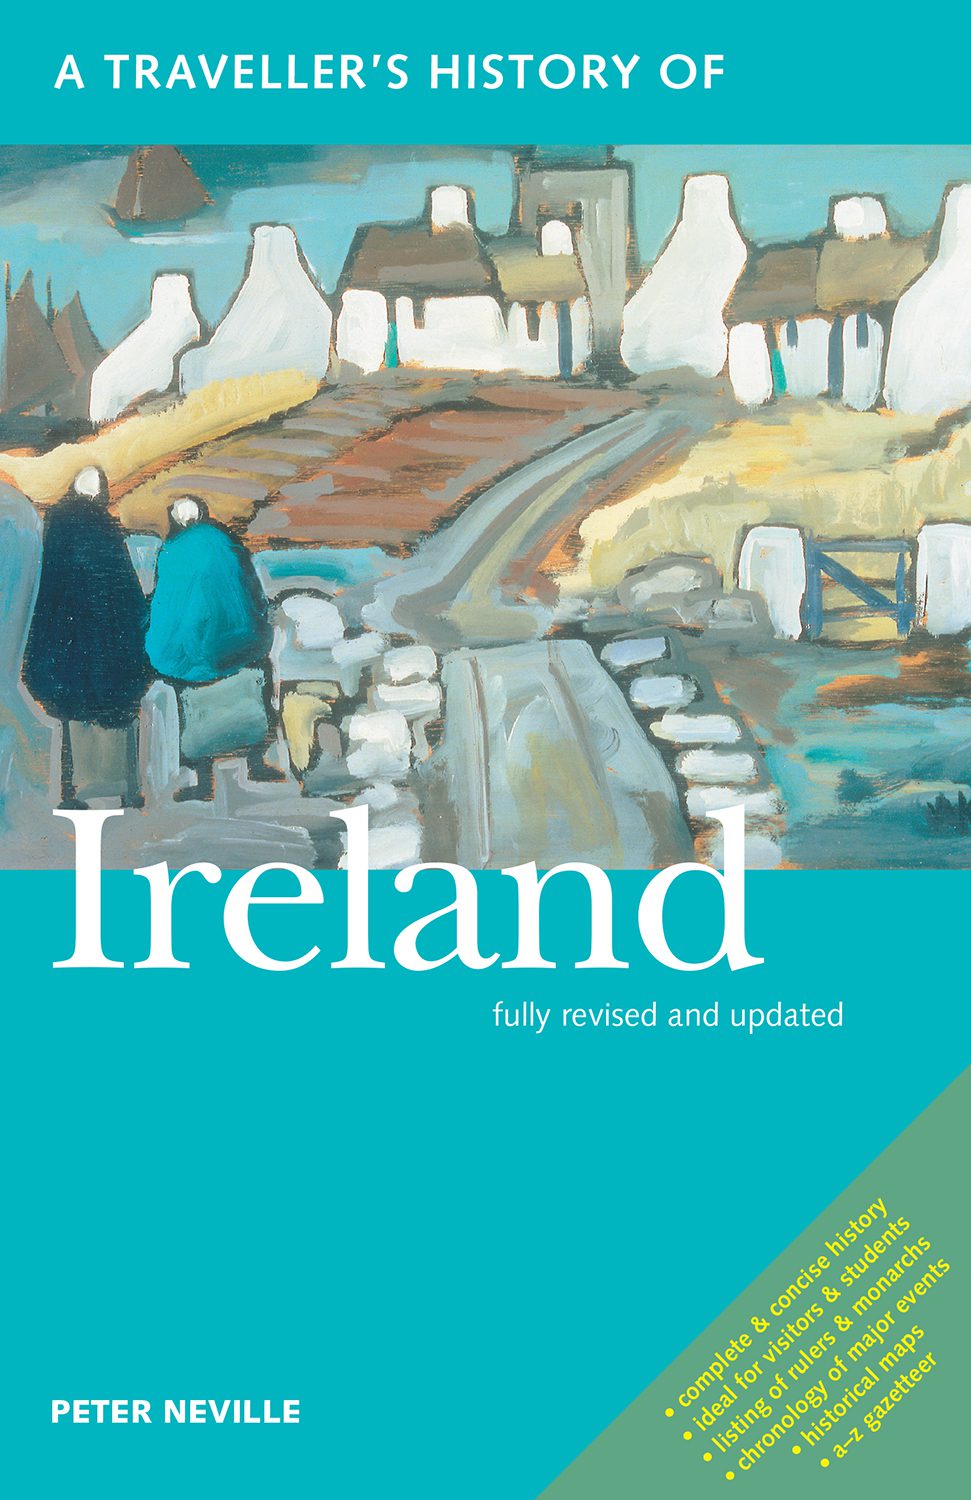 A Traveller’s History of Ireland